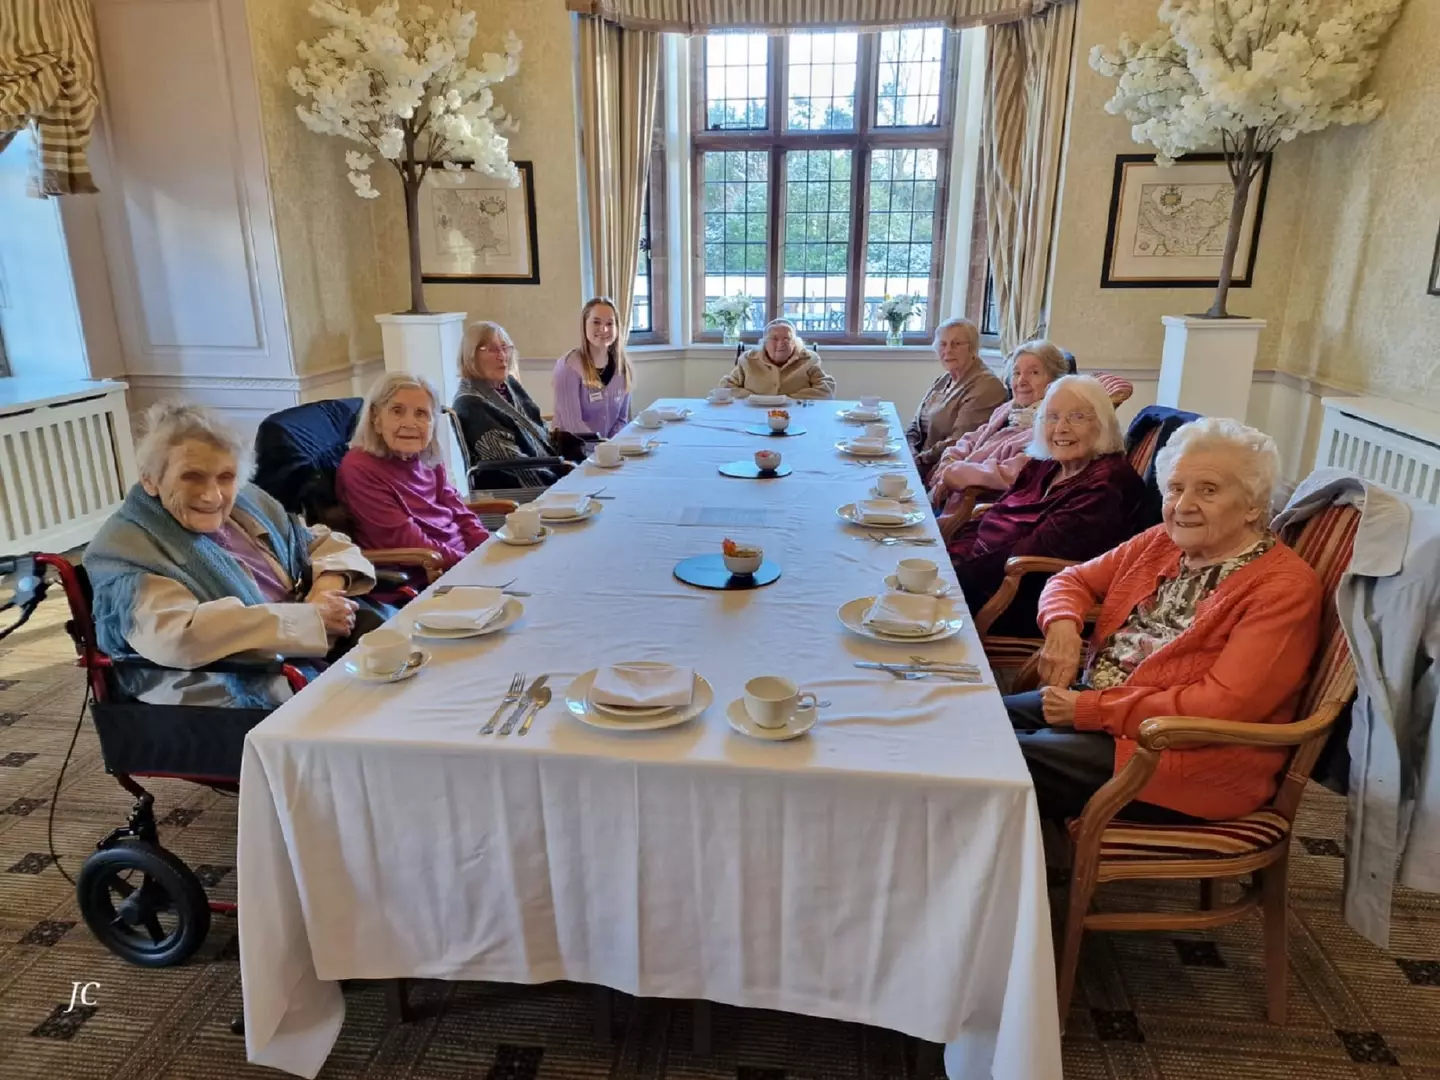 She was also treated to afternoon tea to mark the milestone.